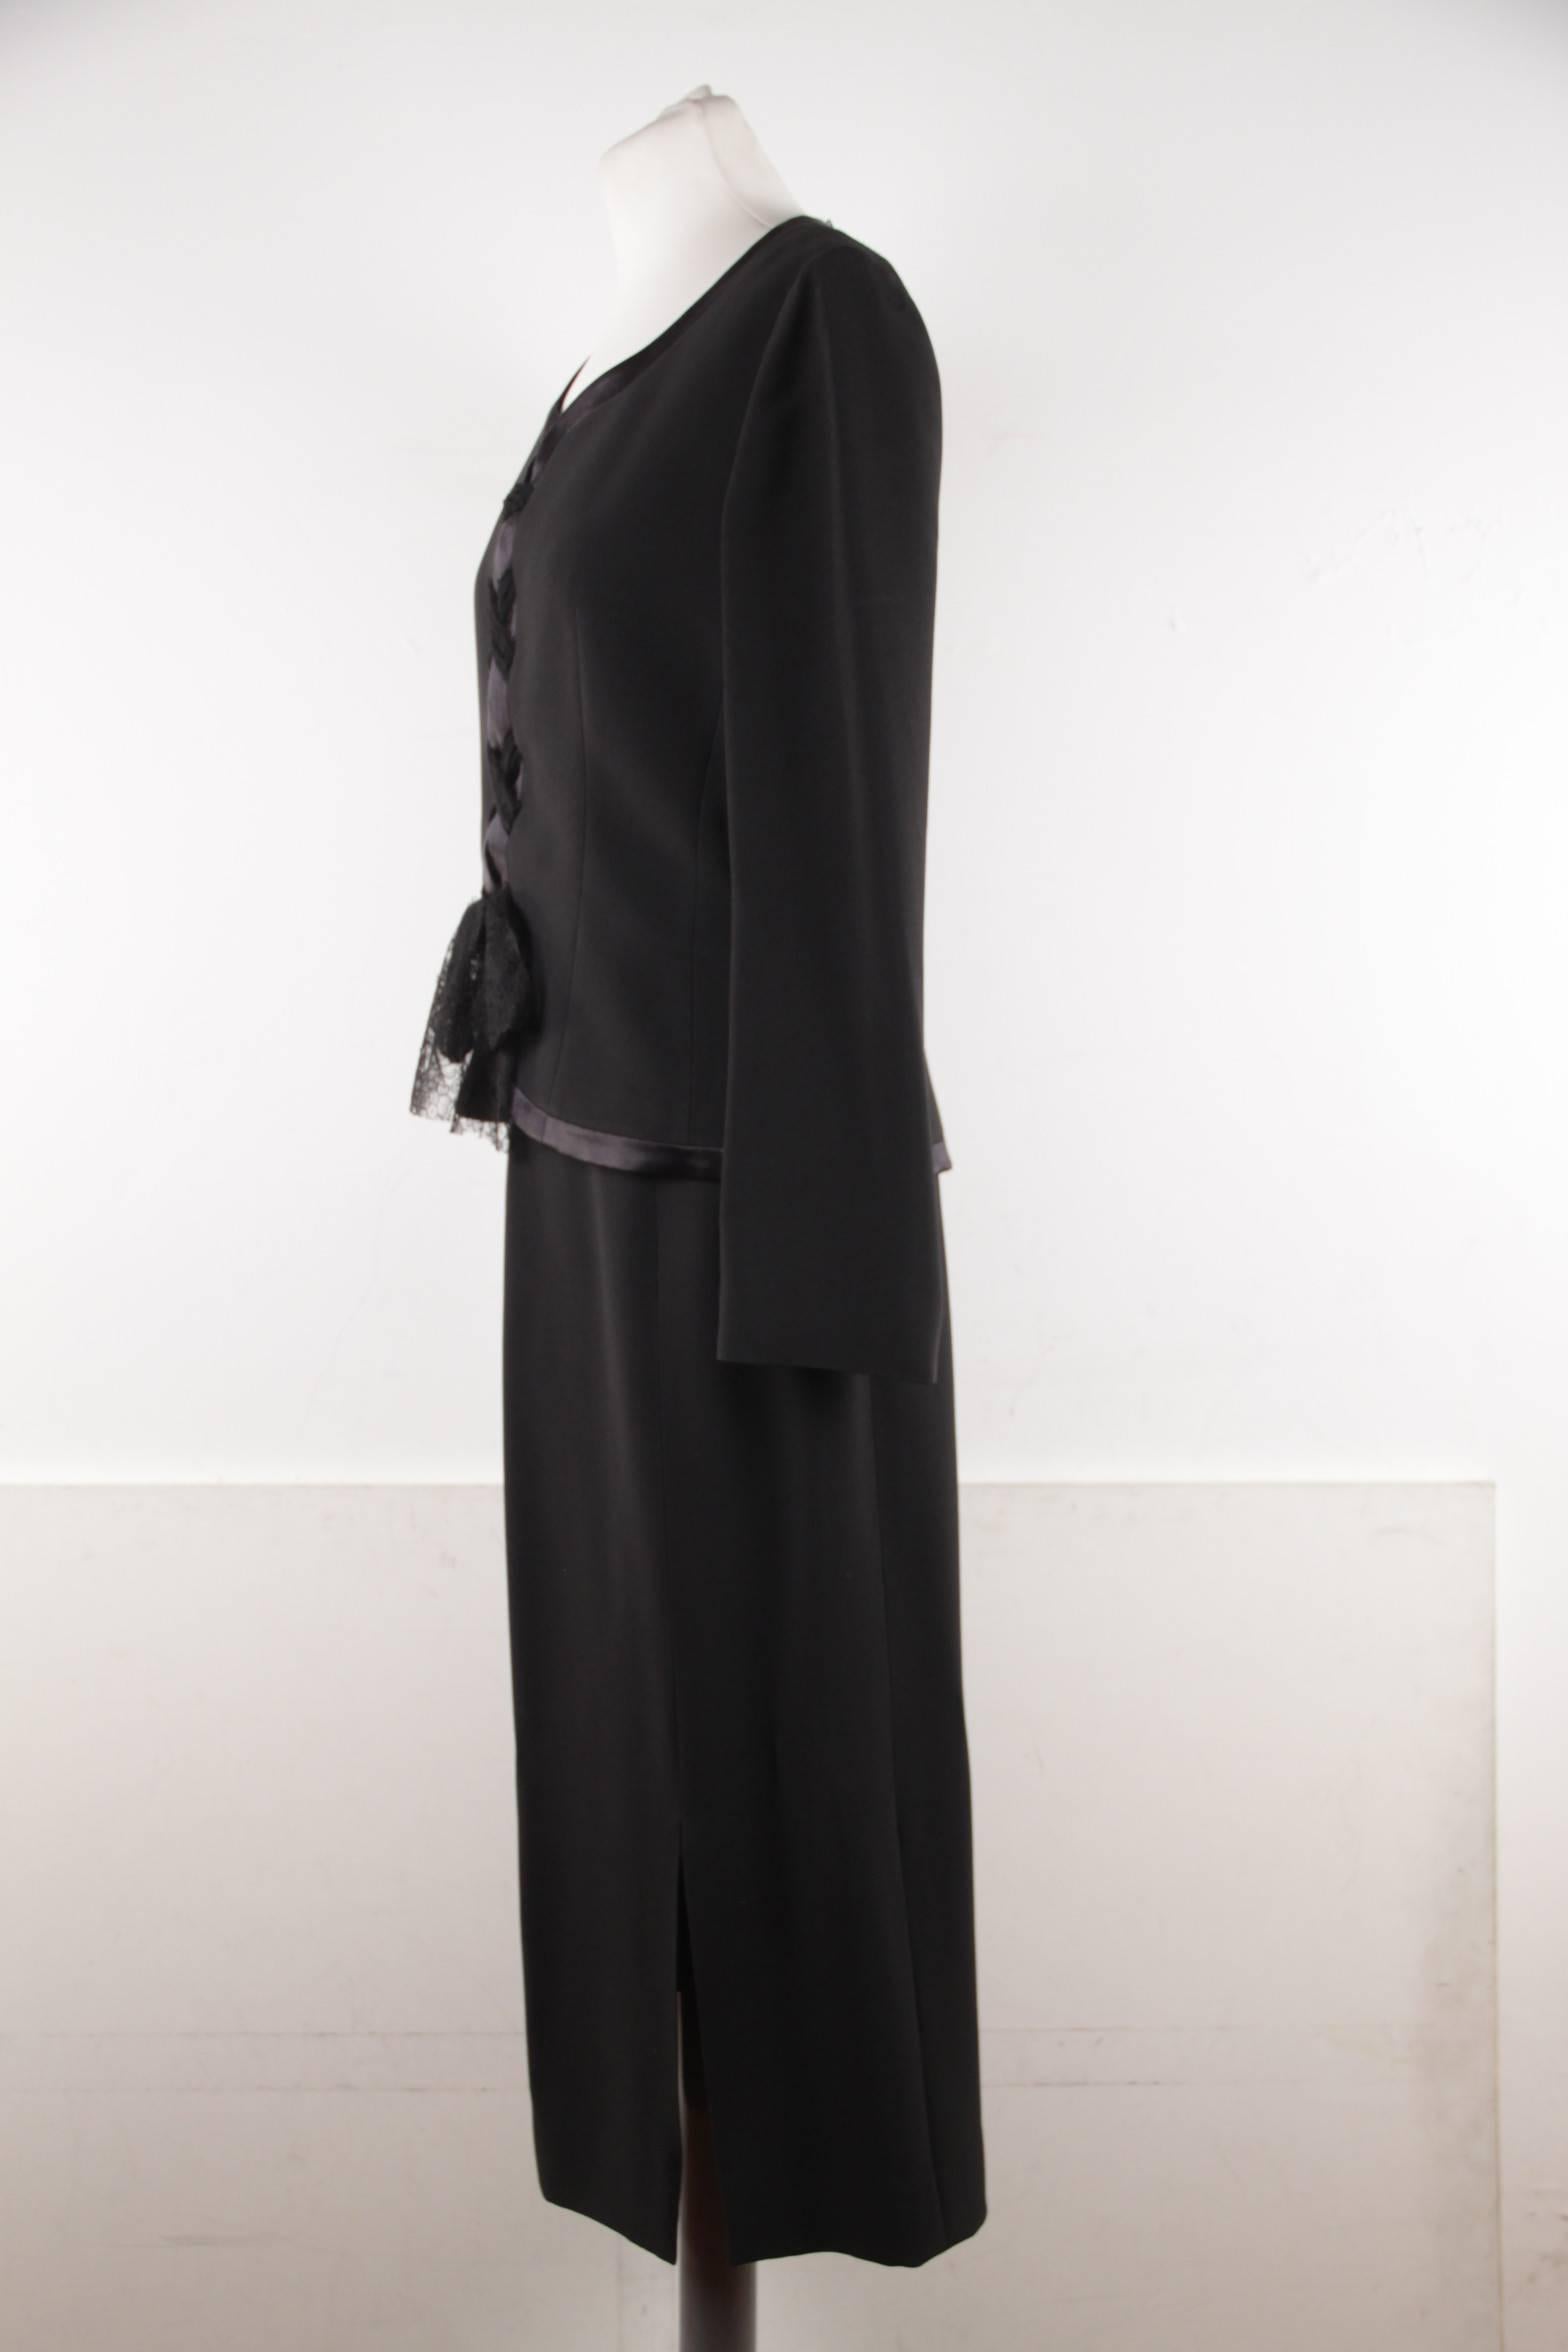 Giorgio Grati Vintage Black Viscose Suit Jacket and Skirt with Laces  2